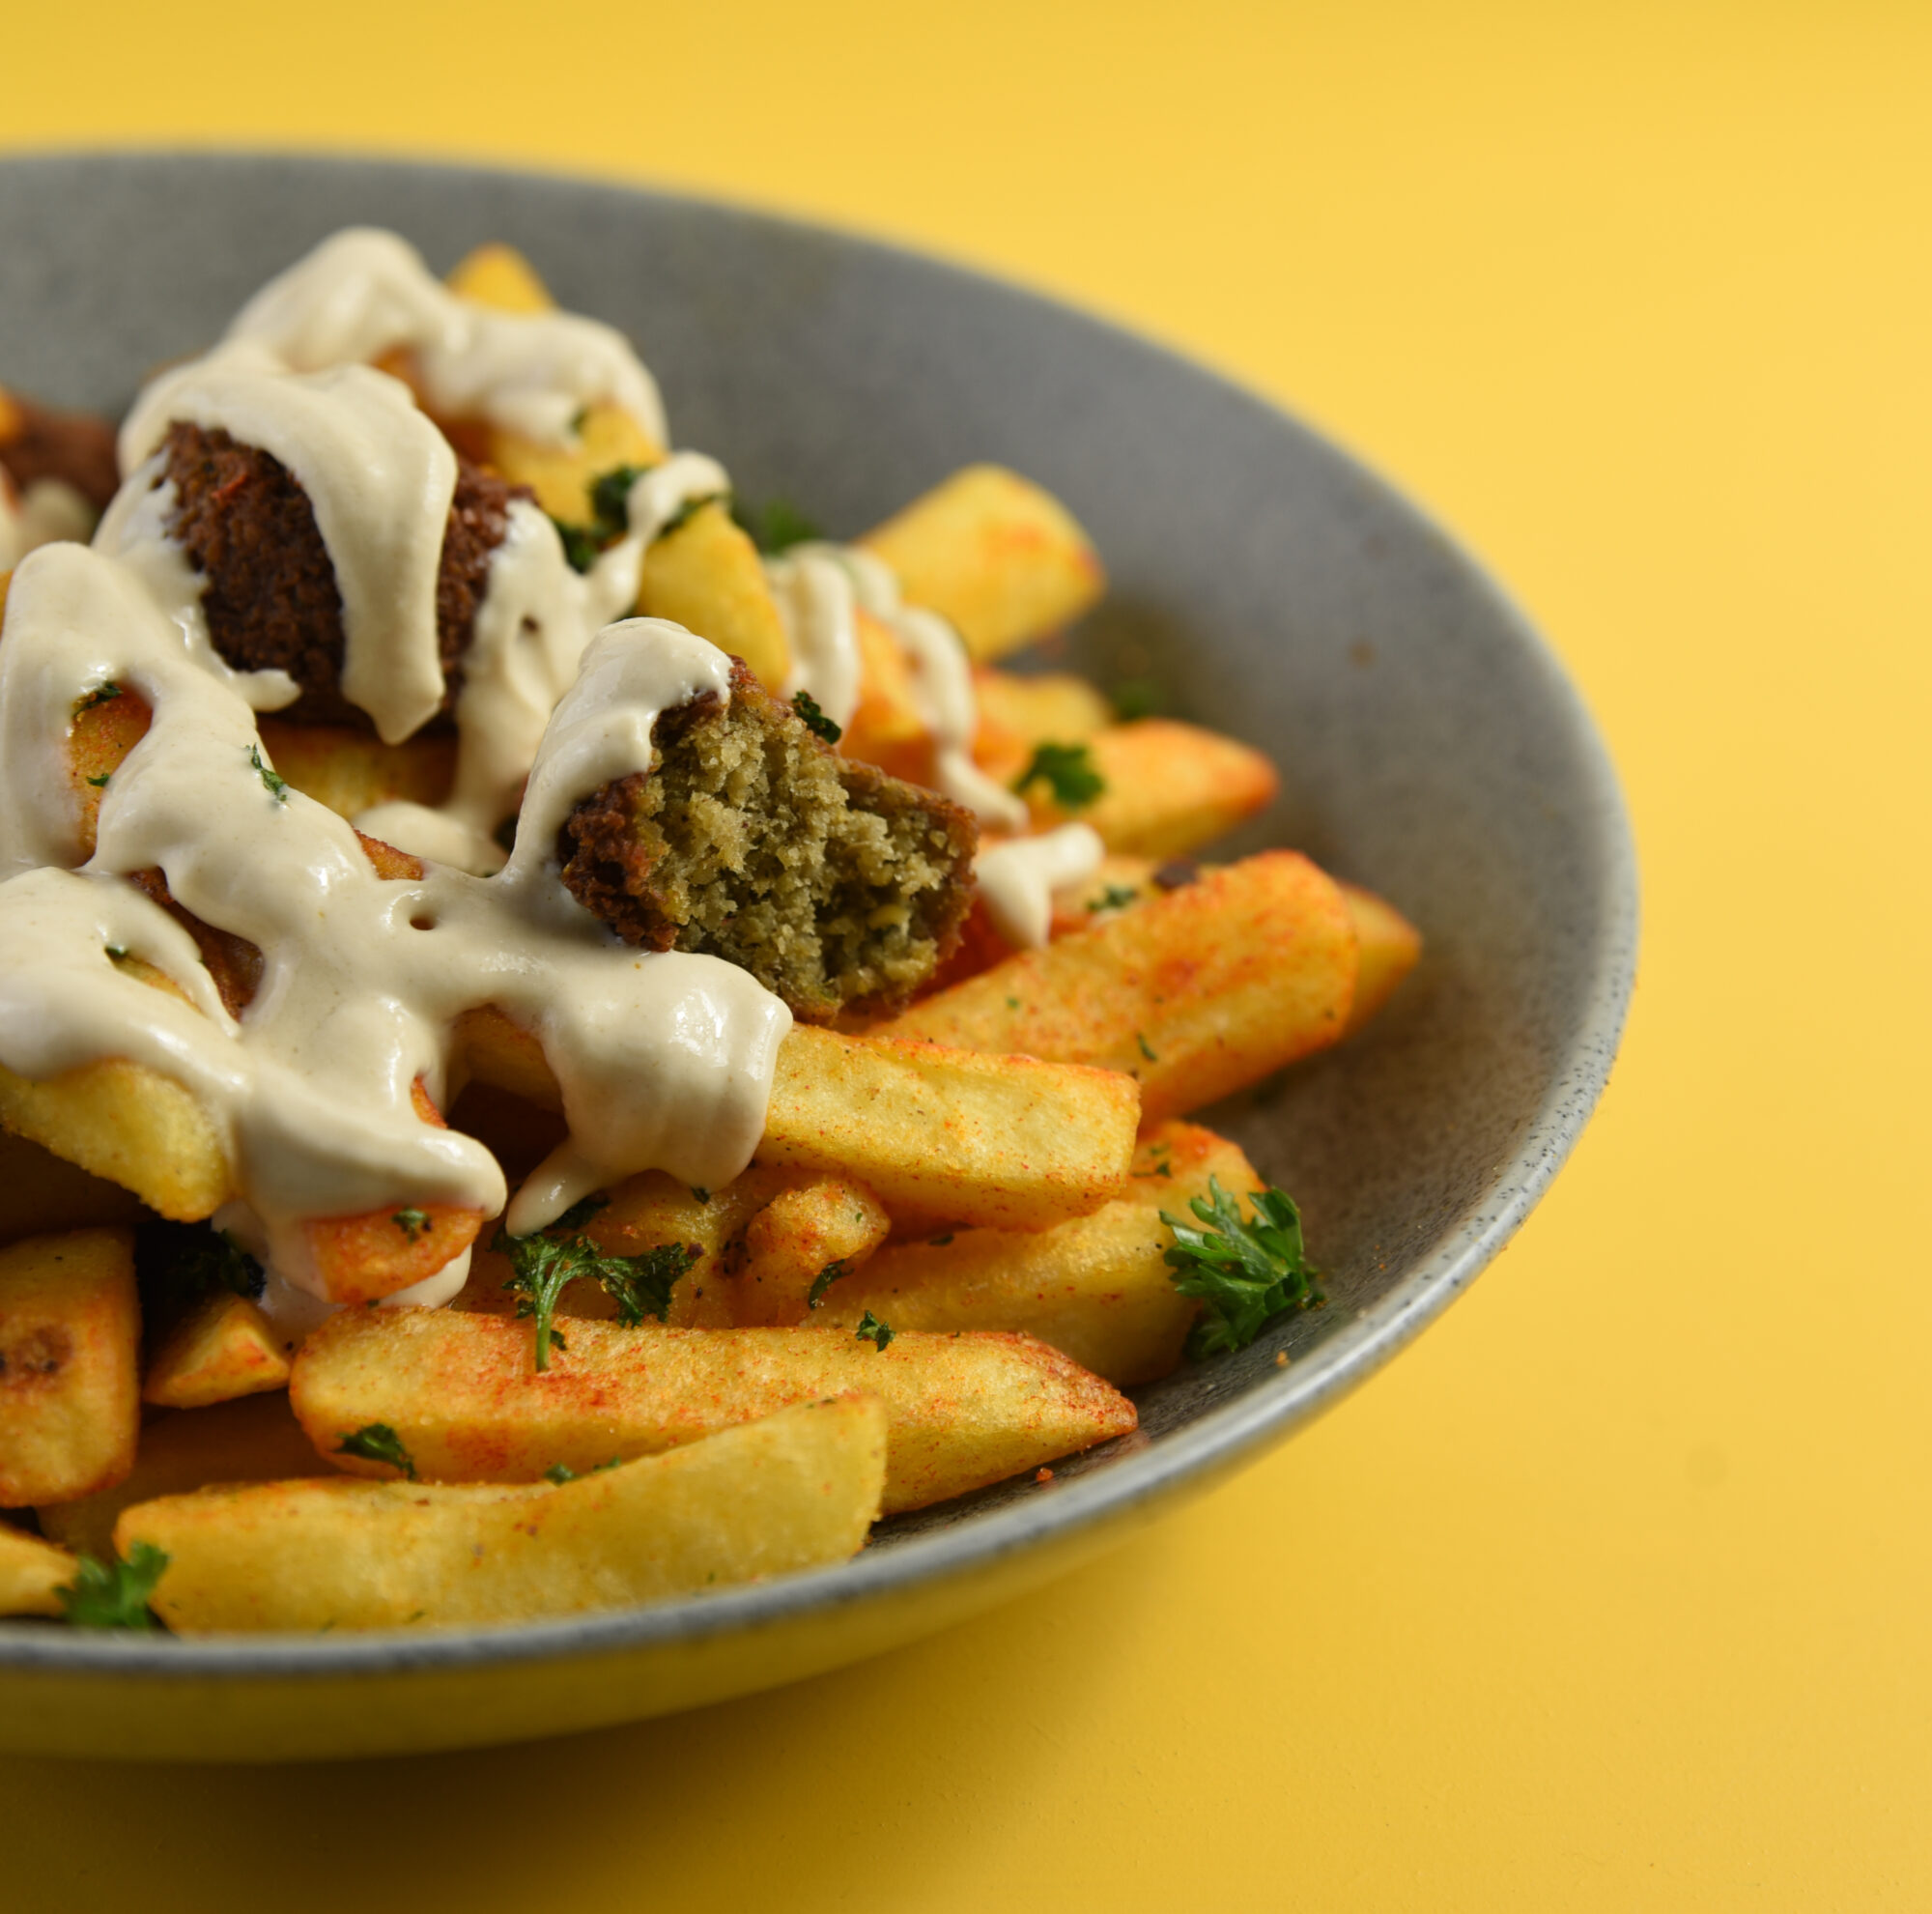 Spiced Chips and falafel bites with Tarator